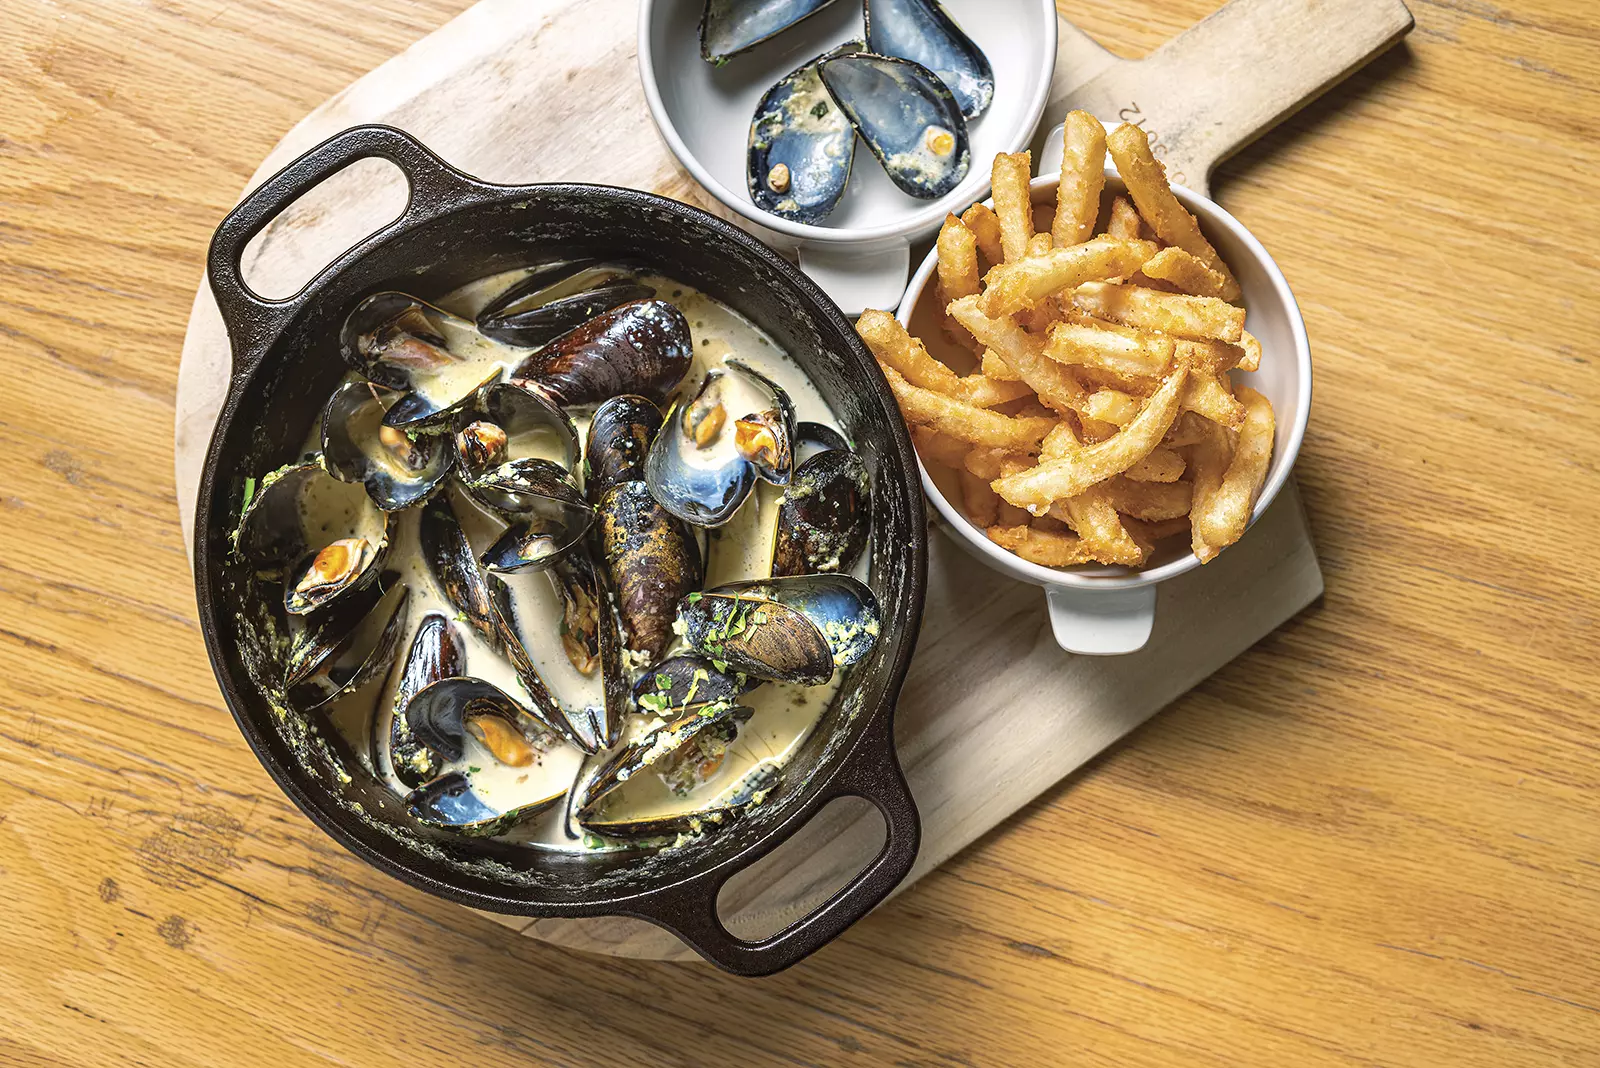 Pub mussels and frites